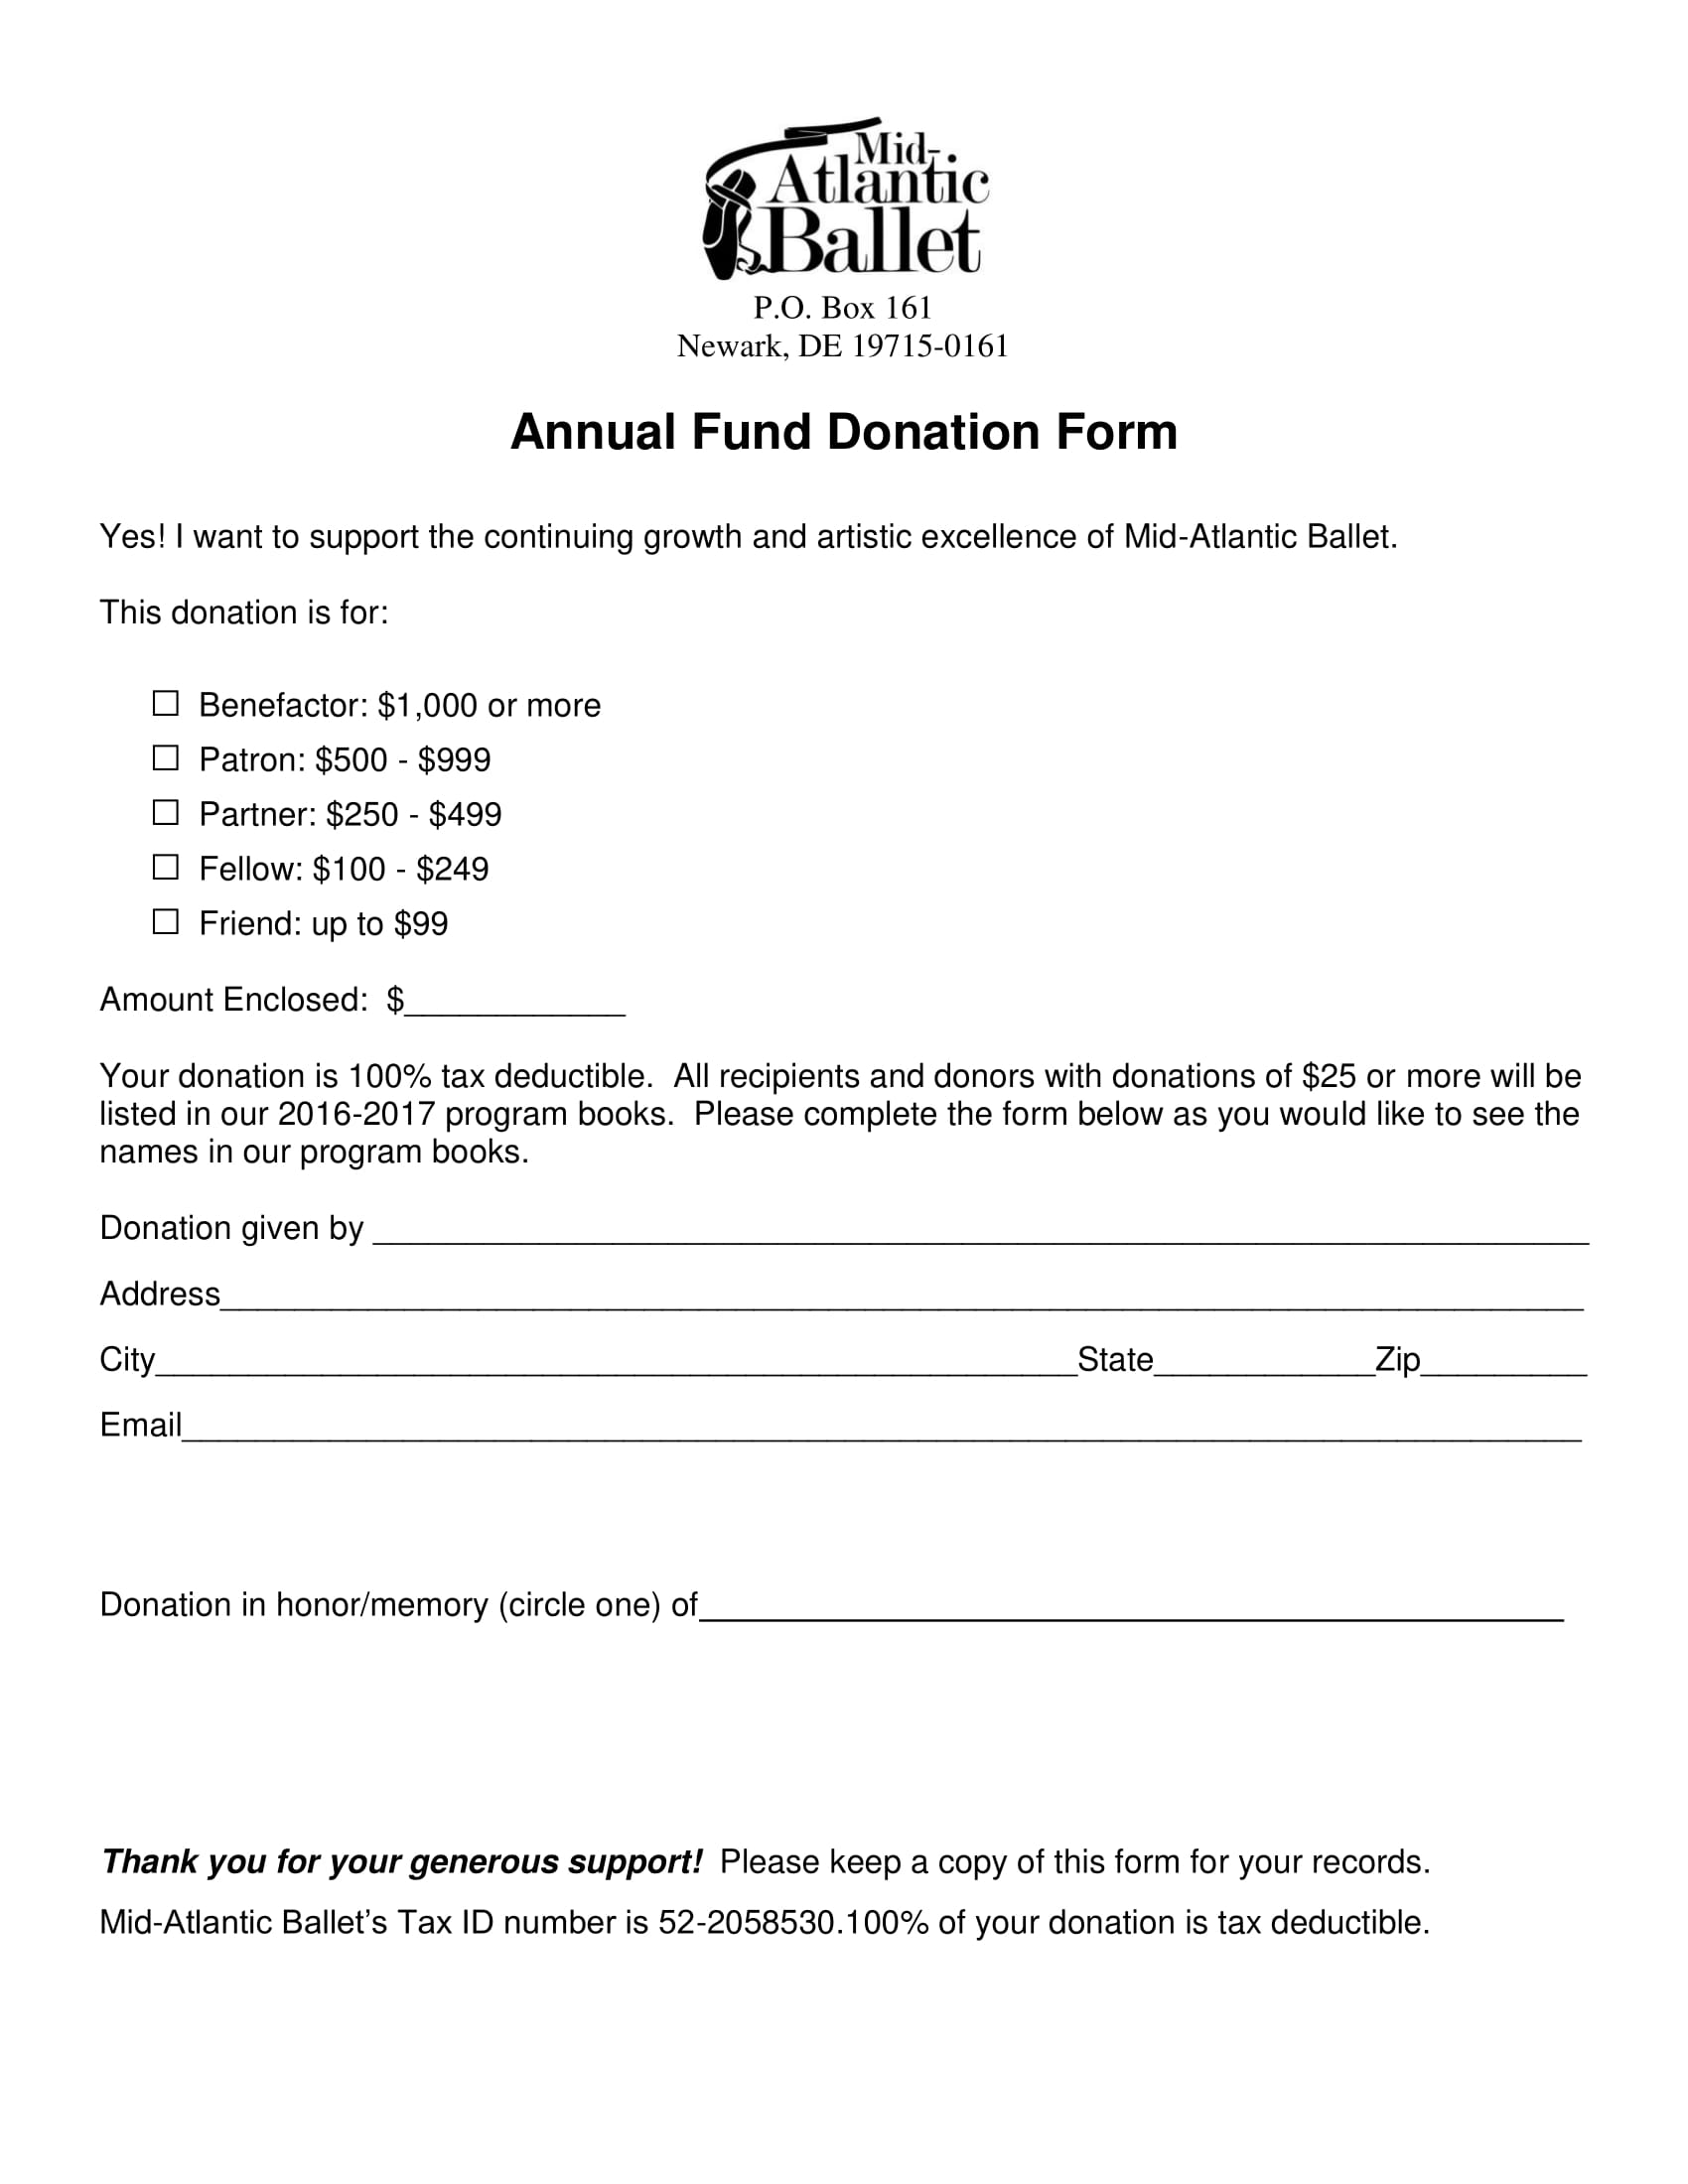 annual fund donation form 1